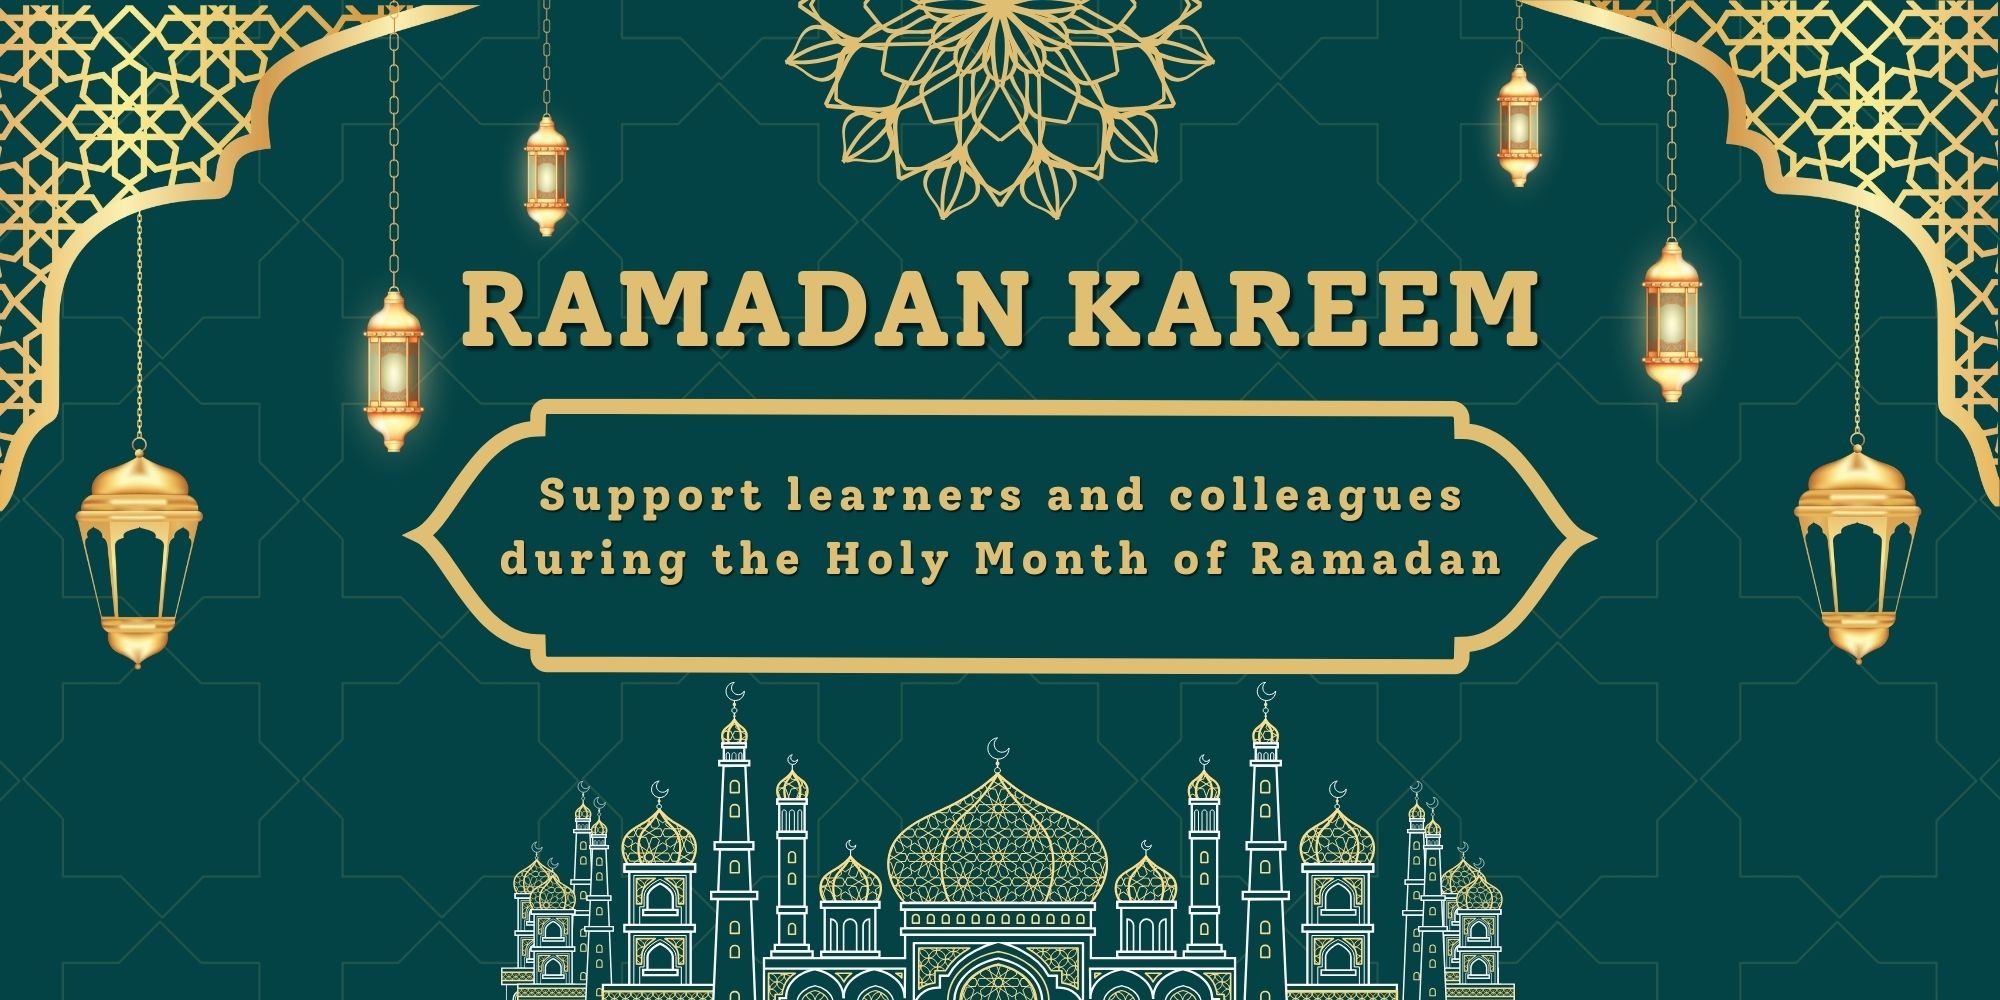 Support learners and colleagues during the Holy Month of Ramadan